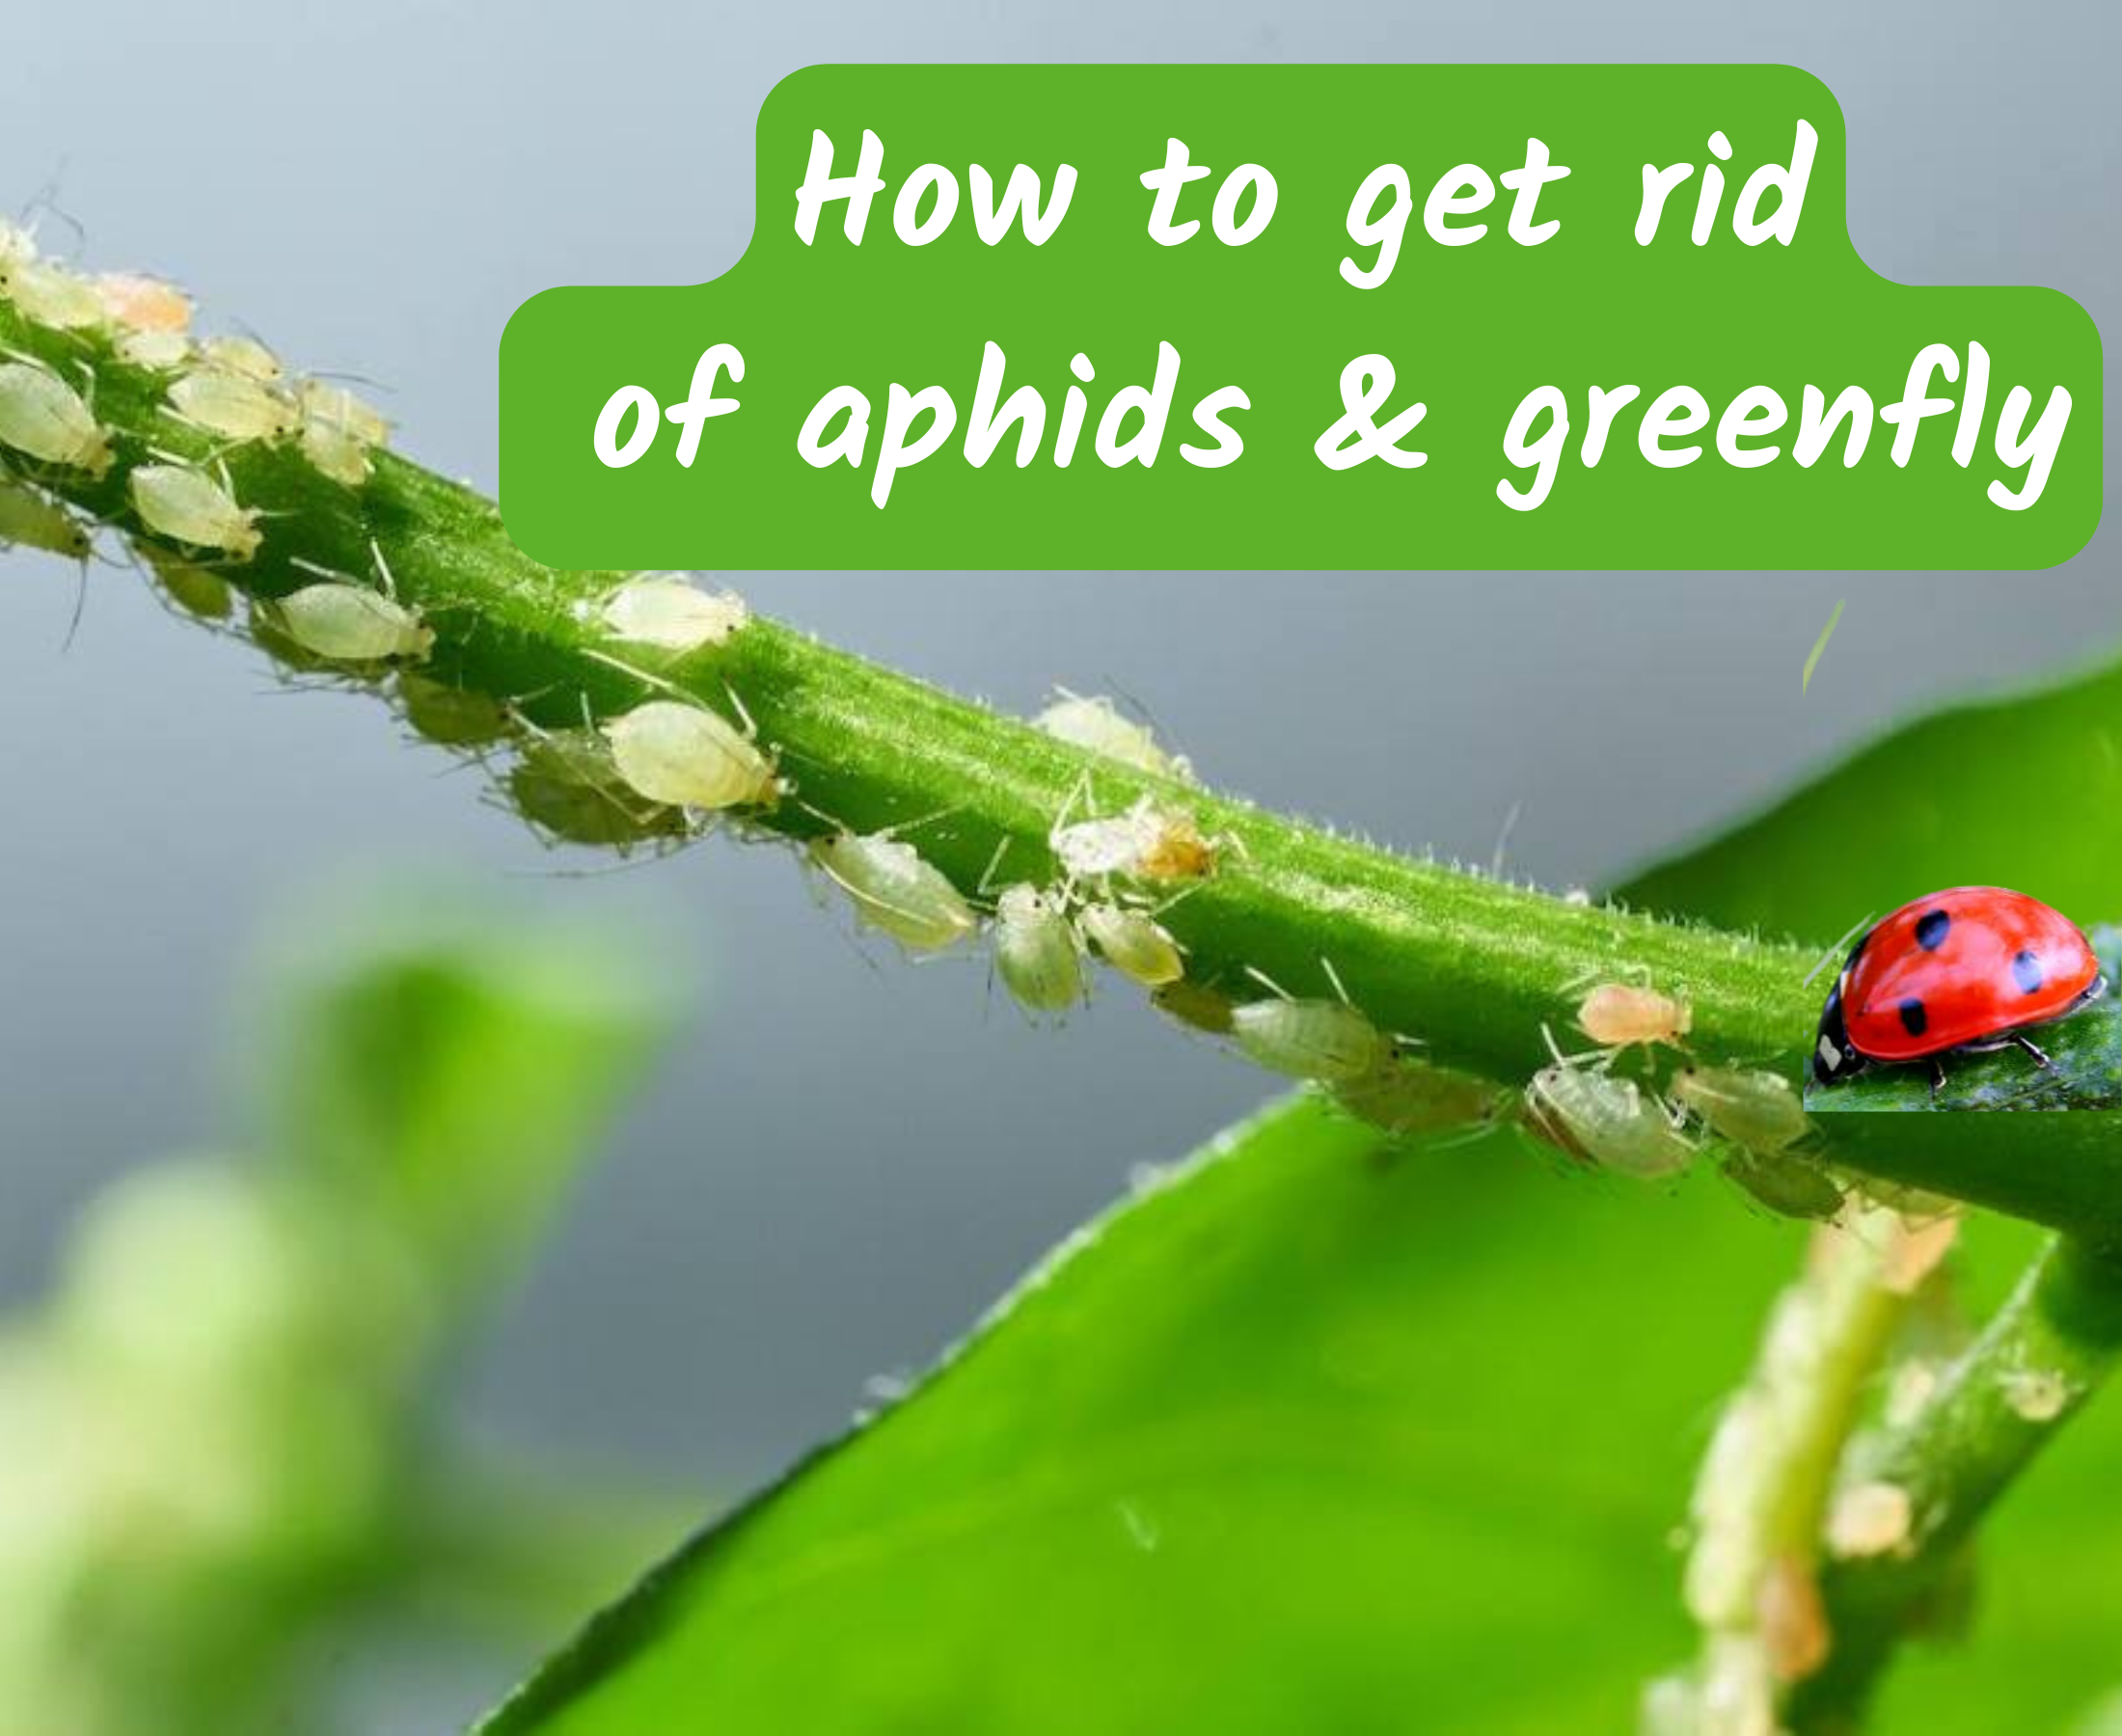 How to get rid of aphids and protect plants?